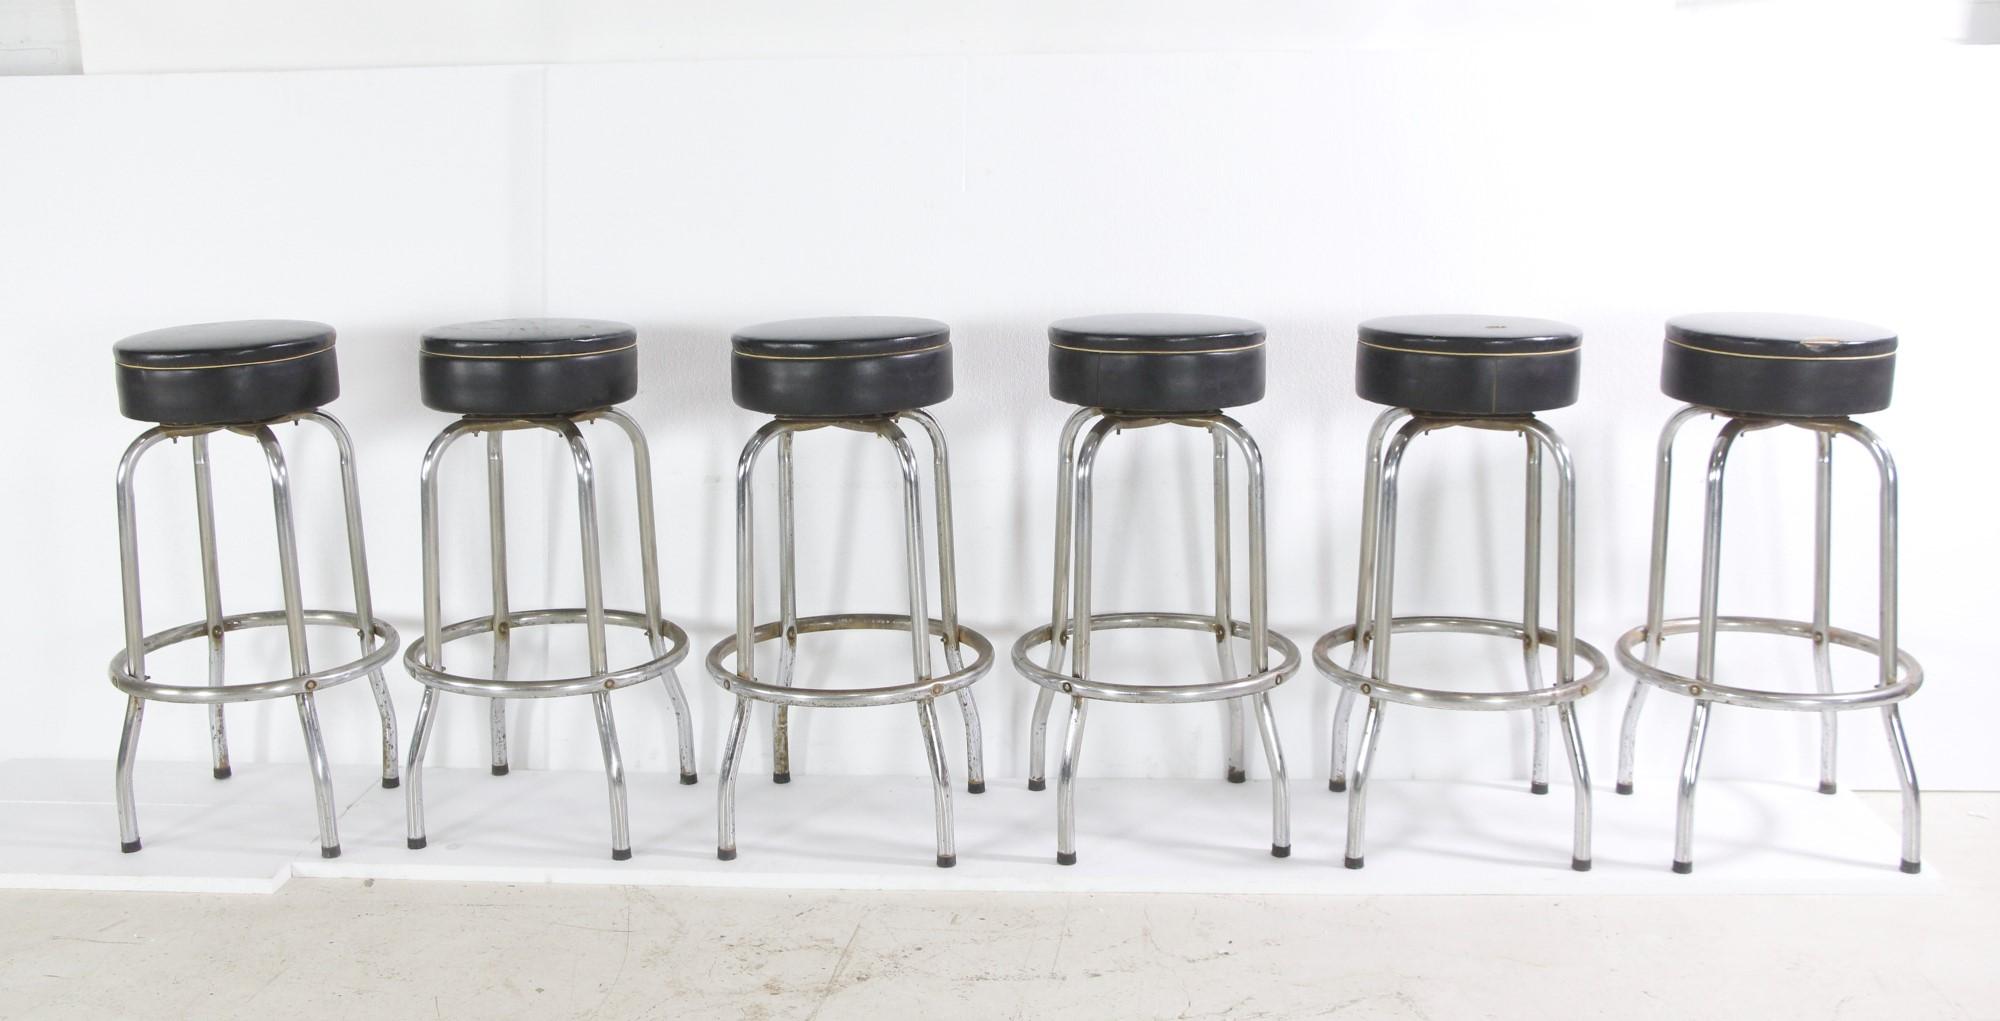 Set of six last 20th century chrome plated bar stools. These feature round black vinyl cushioned seats. Rips, tears, and stains give these a vintage look. Please see photos. Priced as a set. Please note, this item is located in one of our NYC